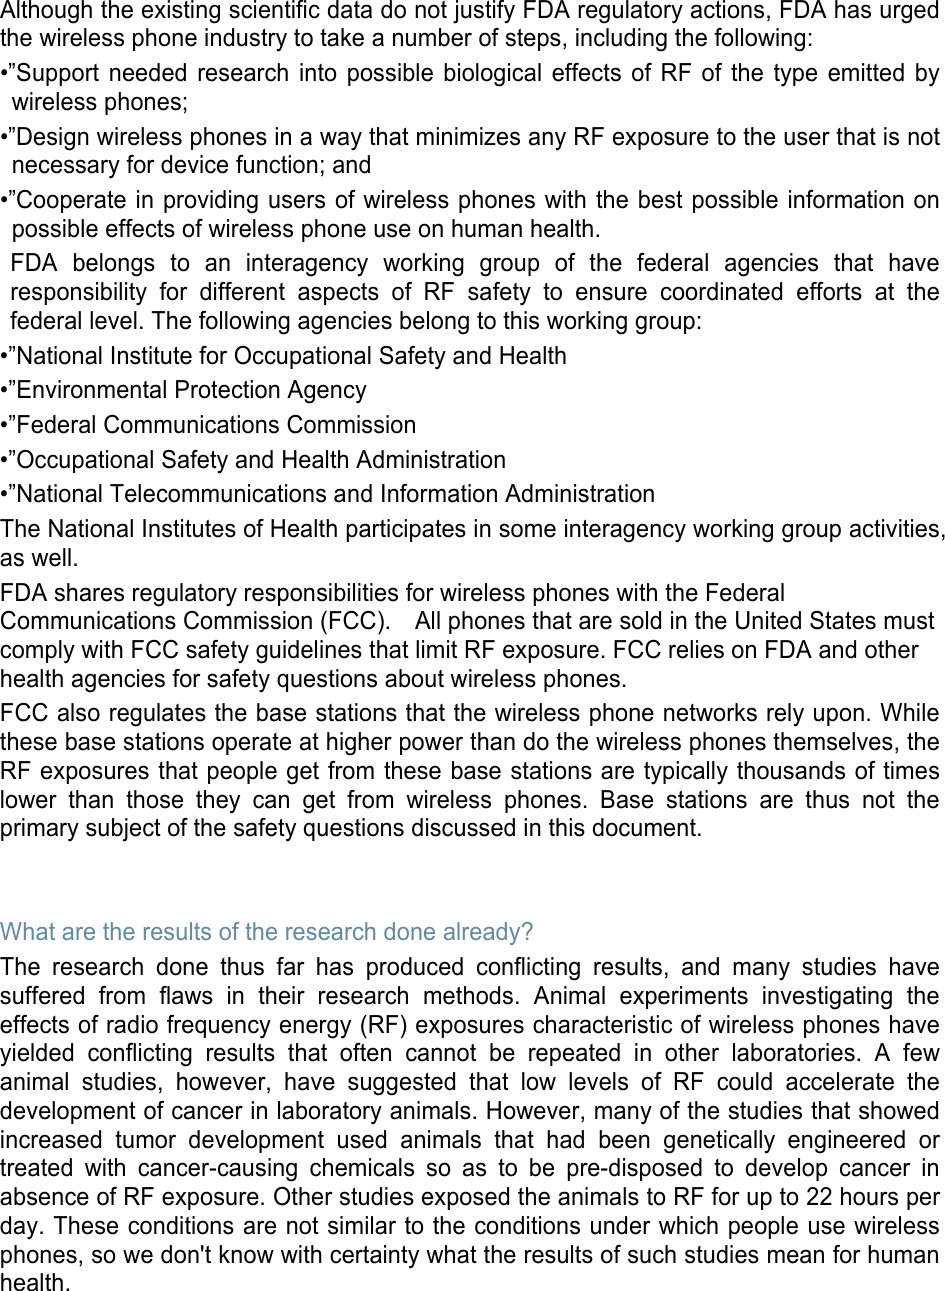 Although the existing scientific data do not justify FDA regulatory actions, FDA has urged the wireless phone industry to take a number of steps, including the following: •”Support needed research into possible biological effects of RF of the type emitted by wireless phones; •”Design wireless phones in a way that minimizes any RF exposure to the user that is not necessary for device function; and •”Cooperate in providing users of wireless phones with the best possible information on possible effects of wireless phone use on human health. FDA belongs to an interagency working group of the federal agencies that have responsibility for different aspects of RF safety to ensure coordinated efforts at the federal level. The following agencies belong to this working group: •”National Institute for Occupational Safety and Health •”Environmental Protection Agency •”Federal Communications Commission •”Occupational Safety and Health Administration •”National Telecommunications and Information Administration The National Institutes of Health participates in some interagency working group activities, as well. FDA shares regulatory responsibilities for wireless phones with the Federal Communications Commission (FCC).    All phones that are sold in the United States must comply with FCC safety guidelines that limit RF exposure. FCC relies on FDA and other health agencies for safety questions about wireless phones. FCC also regulates the base stations that the wireless phone networks rely upon. While these base stations operate at higher power than do the wireless phones themselves, the RF exposures that people get from these base stations are typically thousands of times lower than those they can get from wireless phones. Base stations are thus not the primary subject of the safety questions discussed in this document.   What are the results of the research done already? The research done thus far has produced conflicting results, and many studies have suffered from flaws in their research methods. Animal experiments investigating the effects of radio frequency energy (RF) exposures characteristic of wireless phones have yielded conflicting results that often cannot be repeated in other laboratories. A few animal studies, however, have suggested that low levels of RF could accelerate the development of cancer in laboratory animals. However, many of the studies that showed increased tumor development used animals that had been genetically engineered or treated with cancer-causing chemicals so as to be pre-disposed to develop cancer in absence of RF exposure. Other studies exposed the animals to RF for up to 22 hours per day. These conditions are not similar to the conditions under which people use wireless phones, so we don&apos;t know with certainty what the results of such studies mean for human health.    